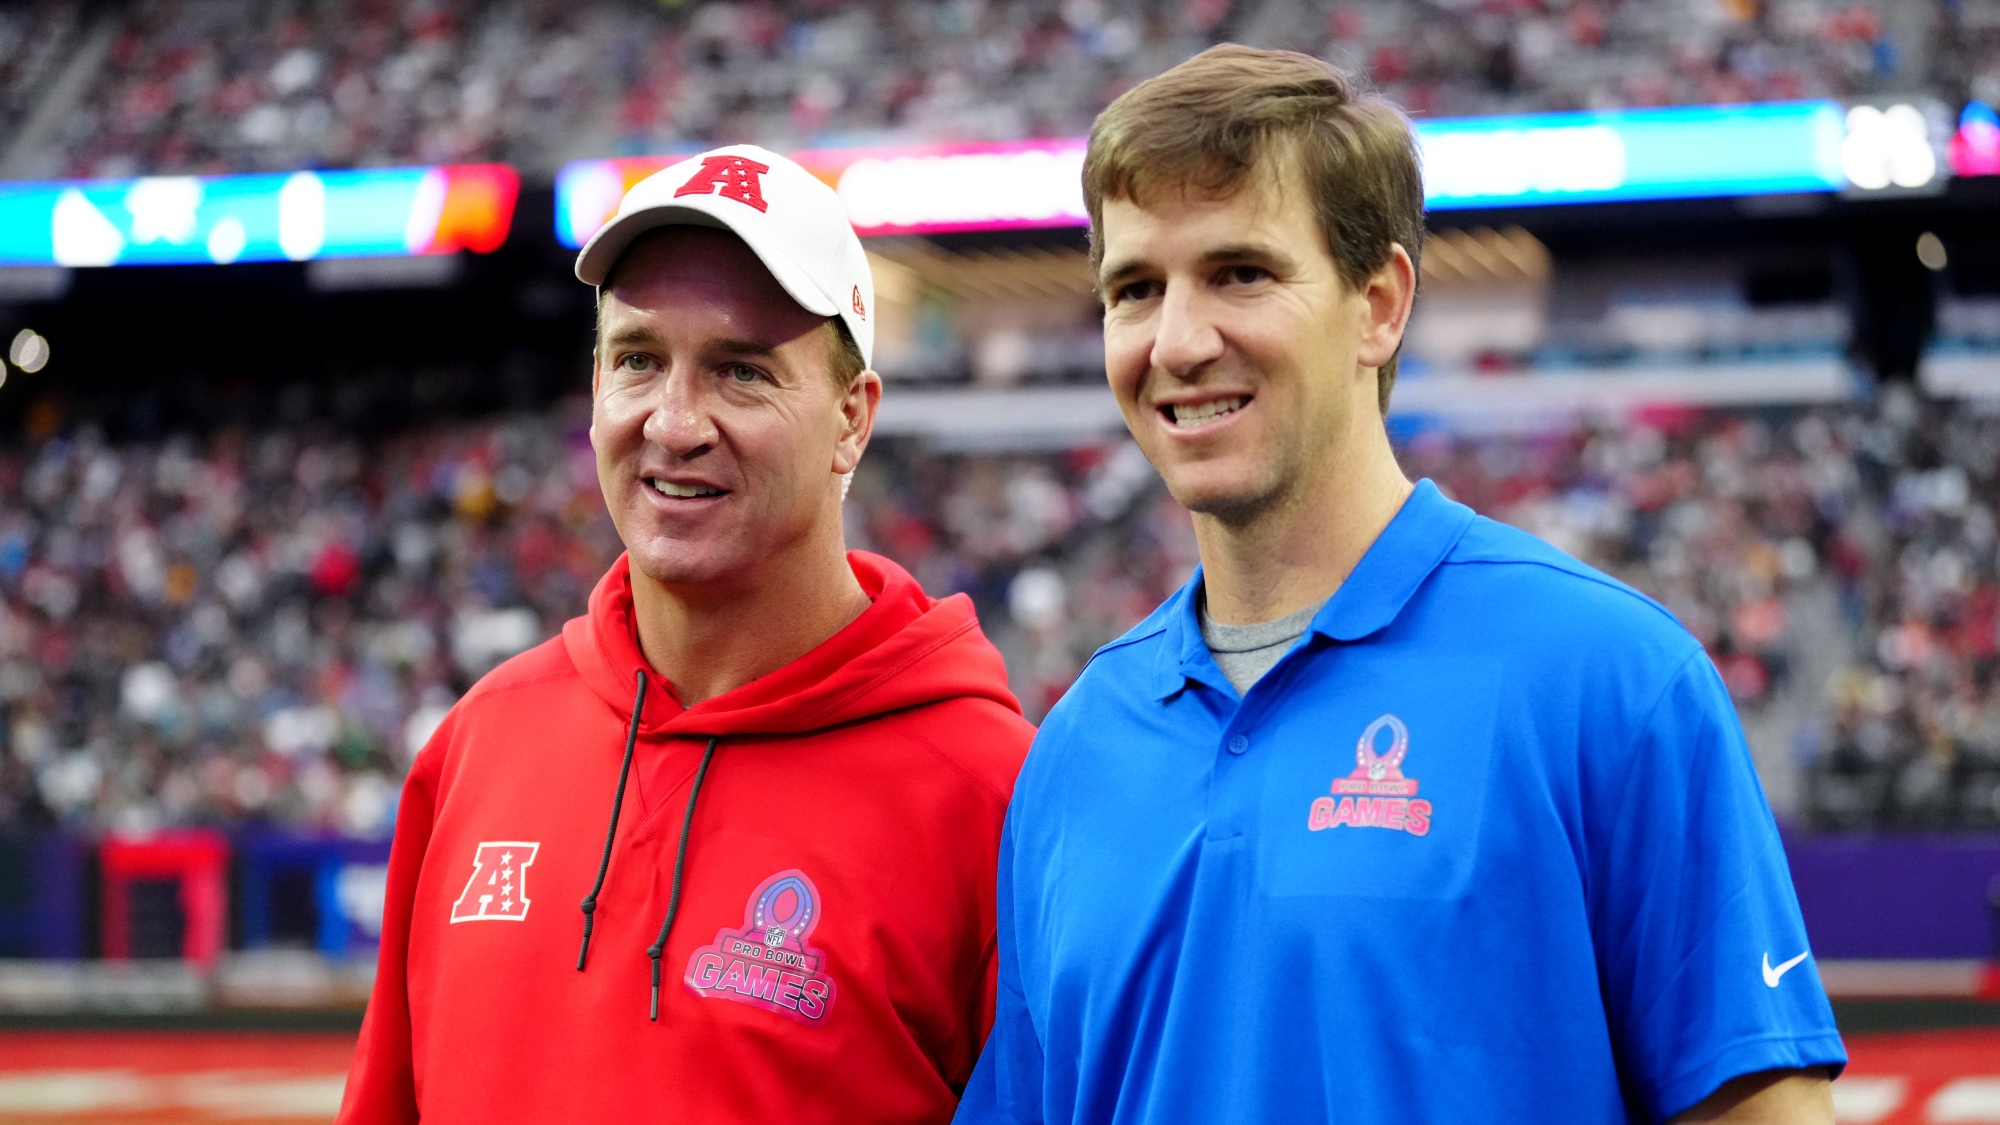 brothers Eli and Peyton Manning